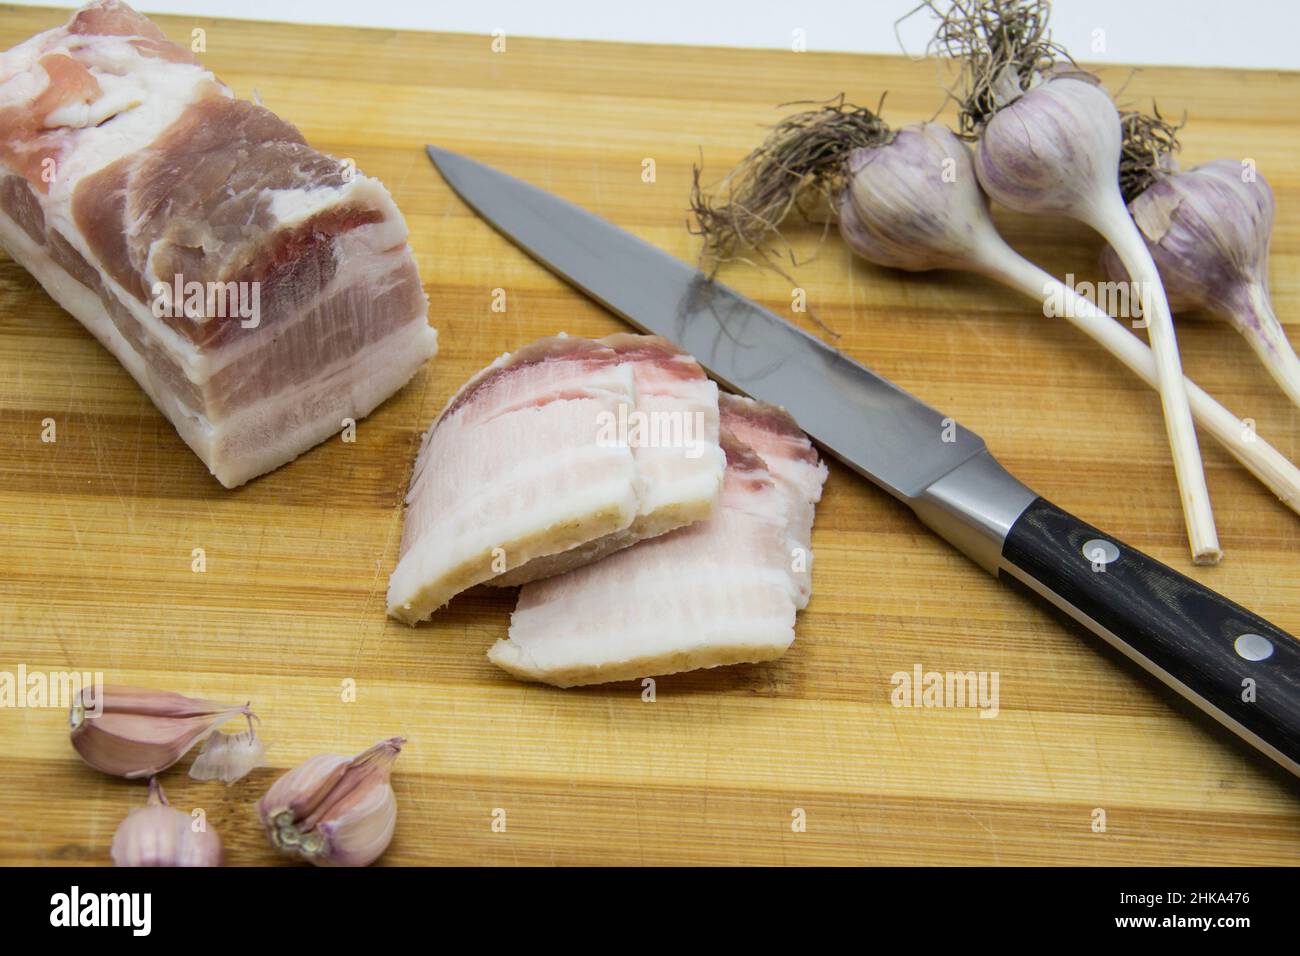 Ukrainian products raw lard with peppercorn and garlic, knife, slices of salo being on cutting board. Ukrainian traditional food concept. Stock Photo